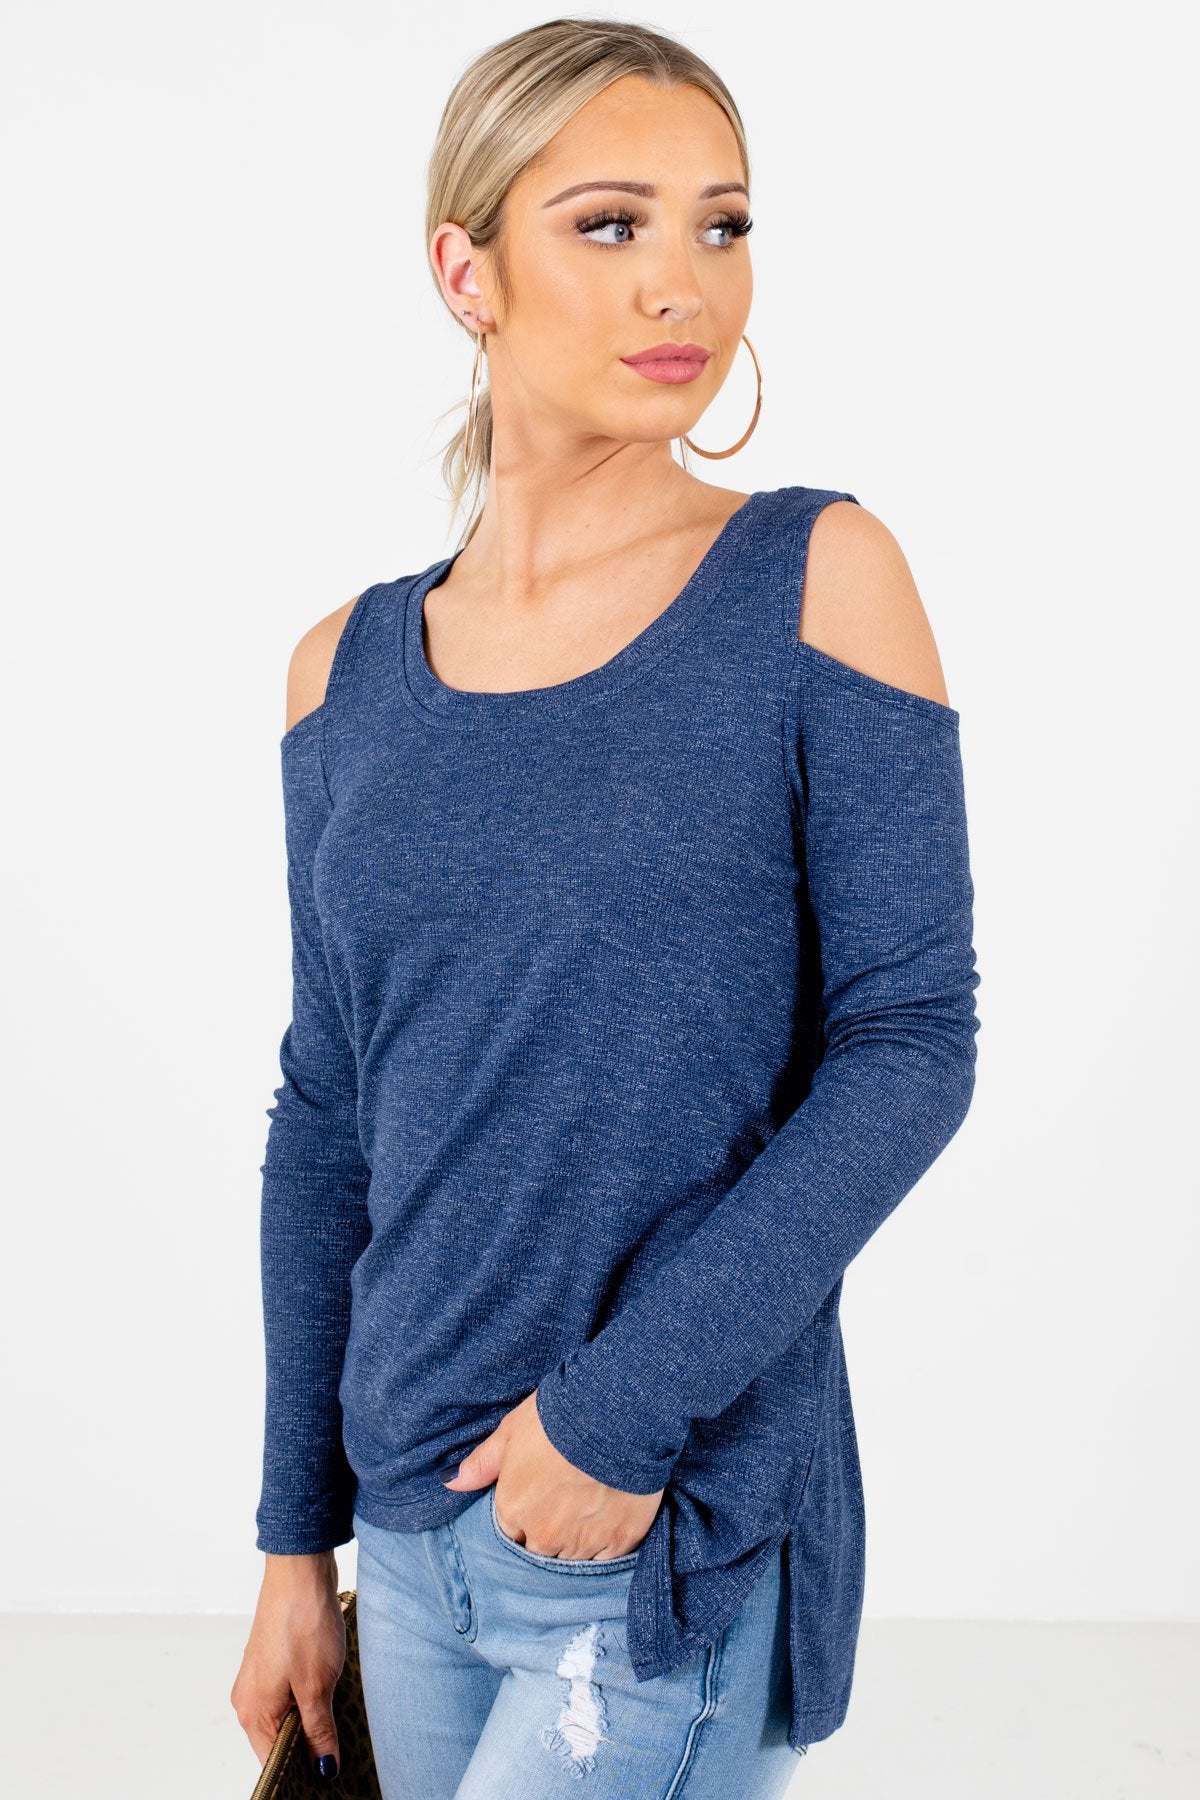 Blue Warm and Cozy Boutique Tops for Women